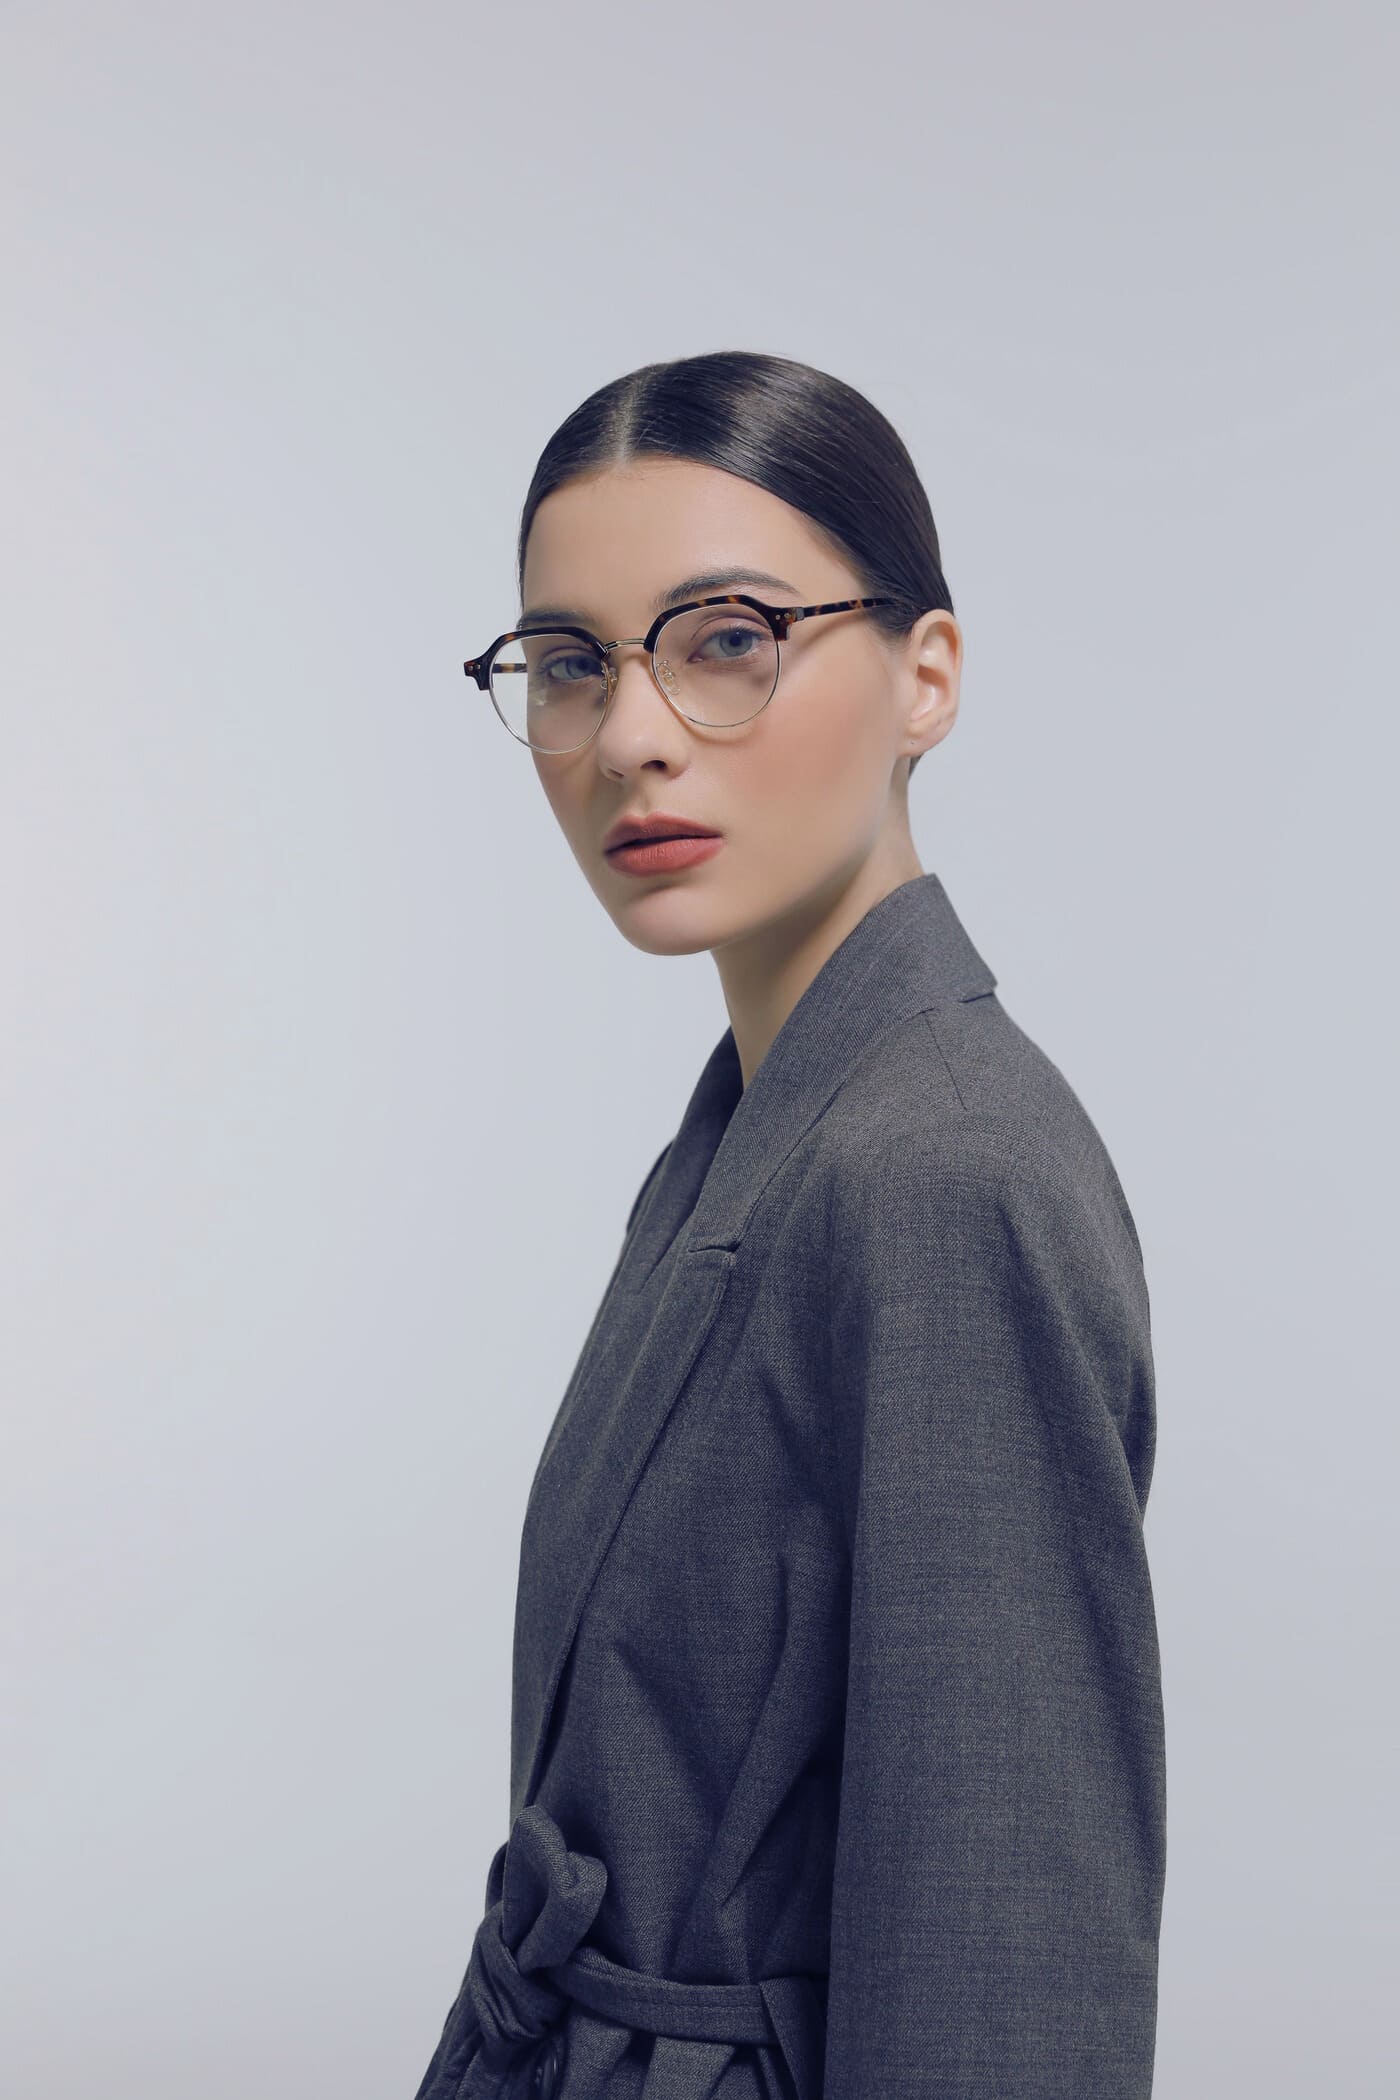 Discover the Life-Enhancing Benefits of GVecchi Blue Light Glasses: Style, Comfort, and Wellbeing